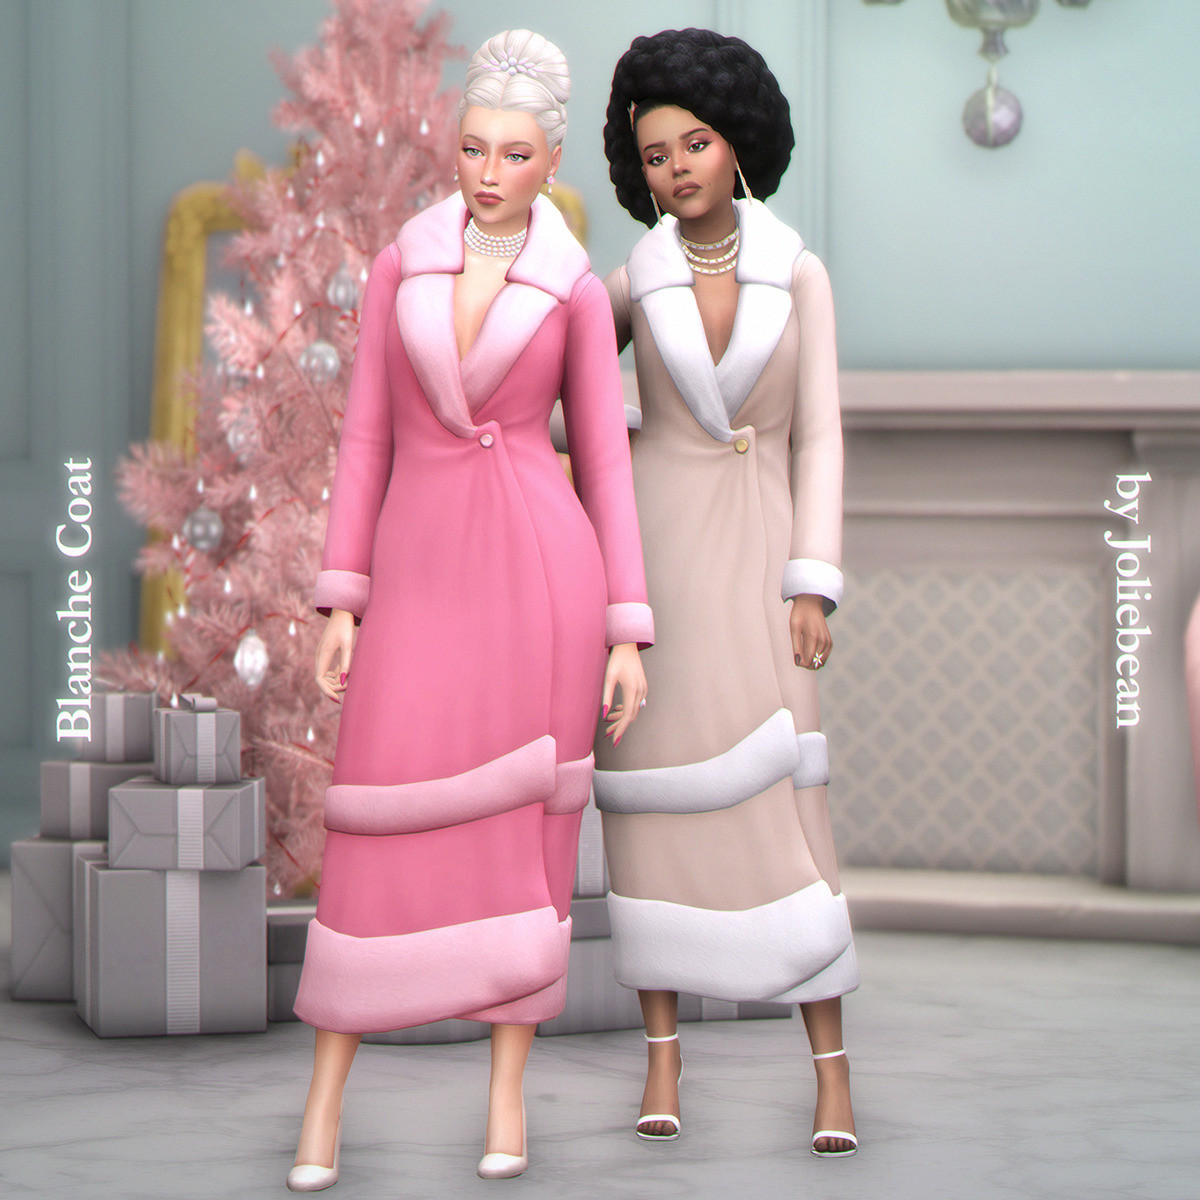 sims, spice and everything nice — Free Spirit - a CC pack by Joliebean &  DallasGirl